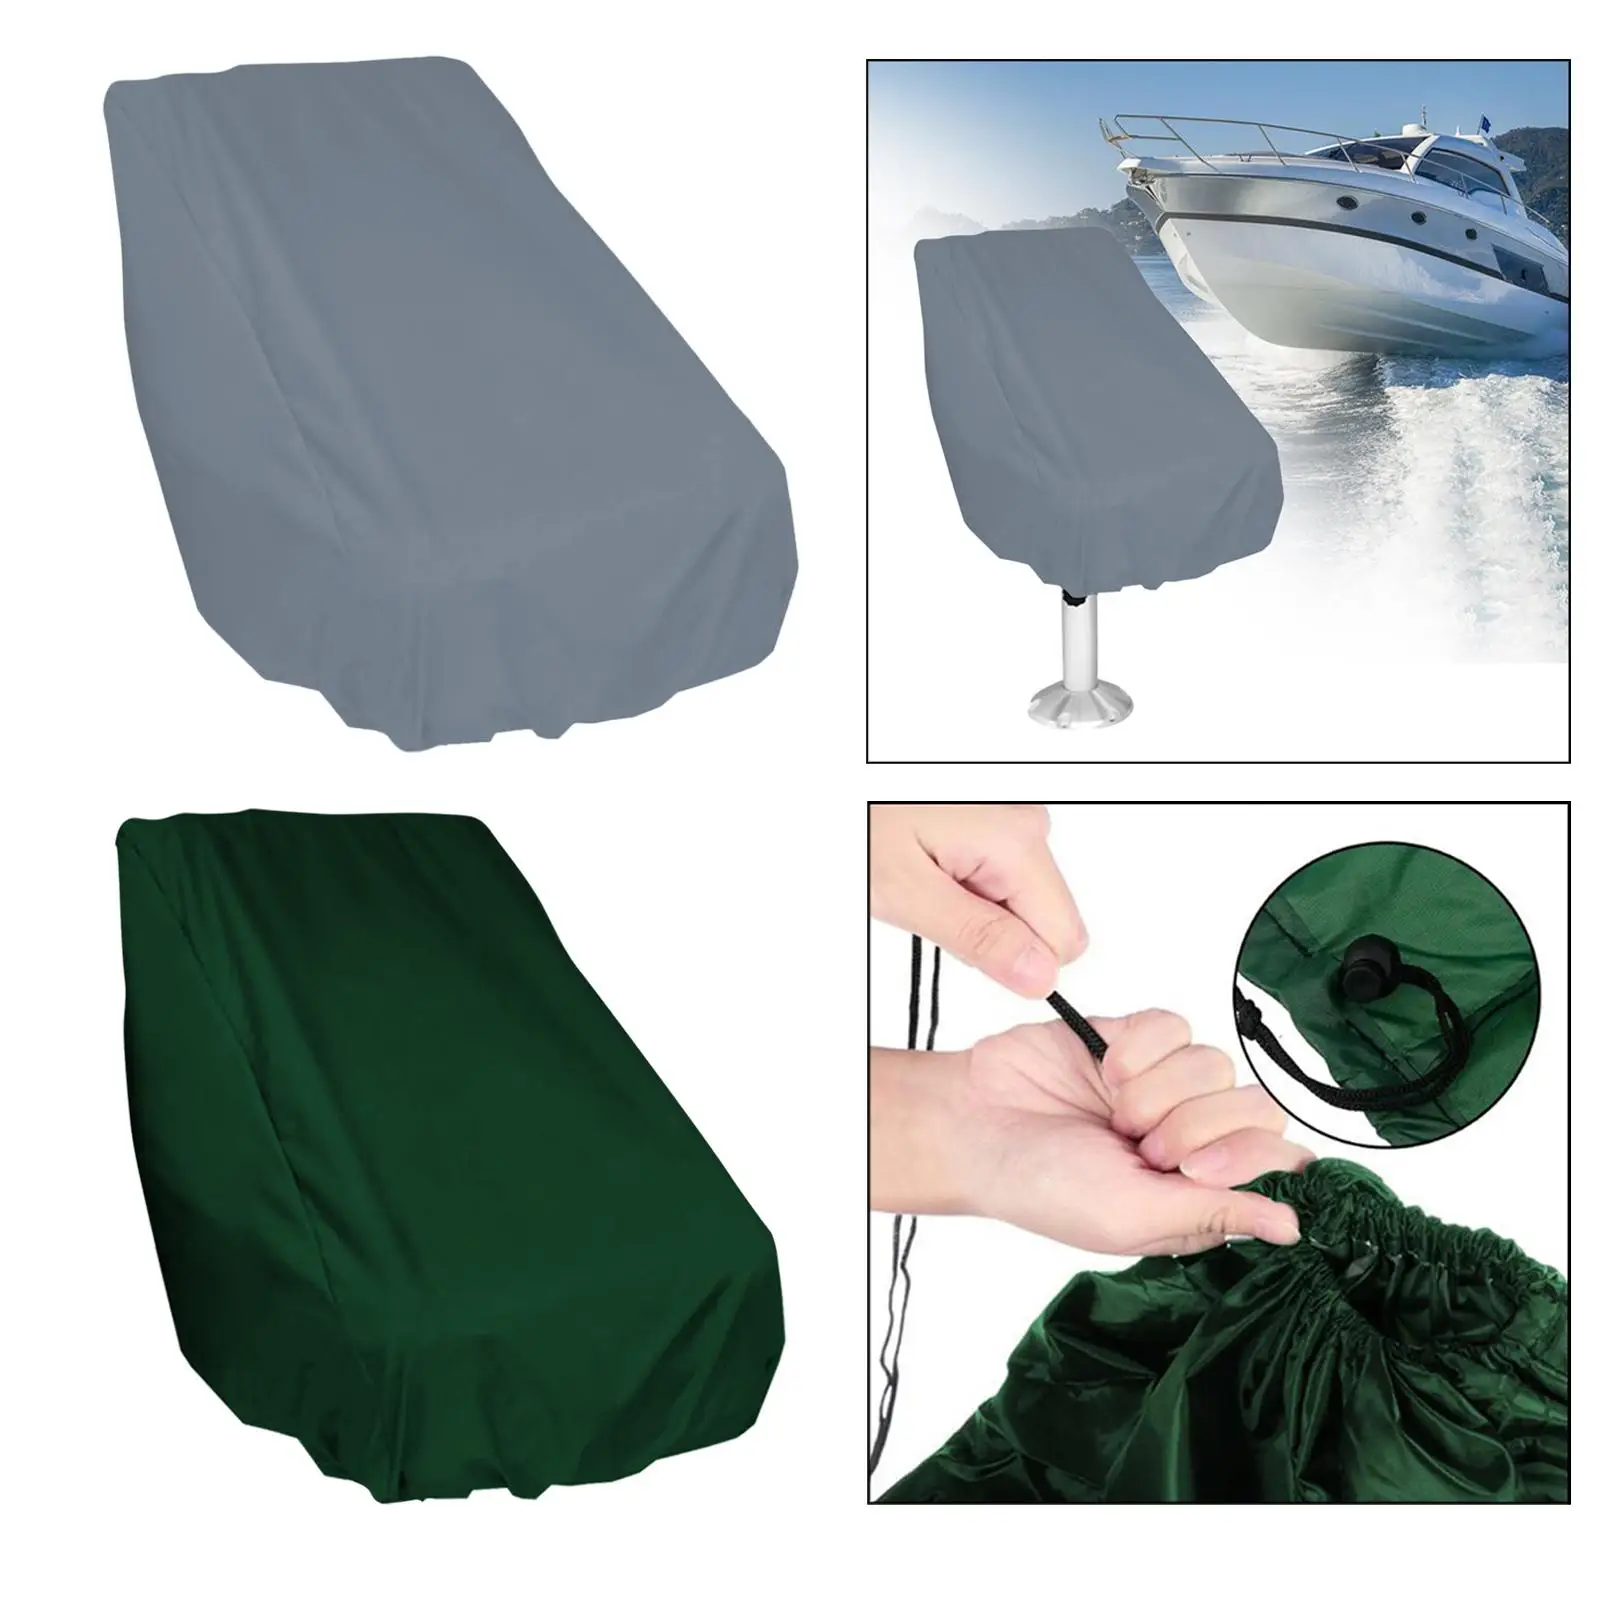 Boat Seat Cover Weather Resistant Heavy Duty Oxford Fabric Boat Bench Chair Seat Cover Outdoor Helm Chair Protective Covers